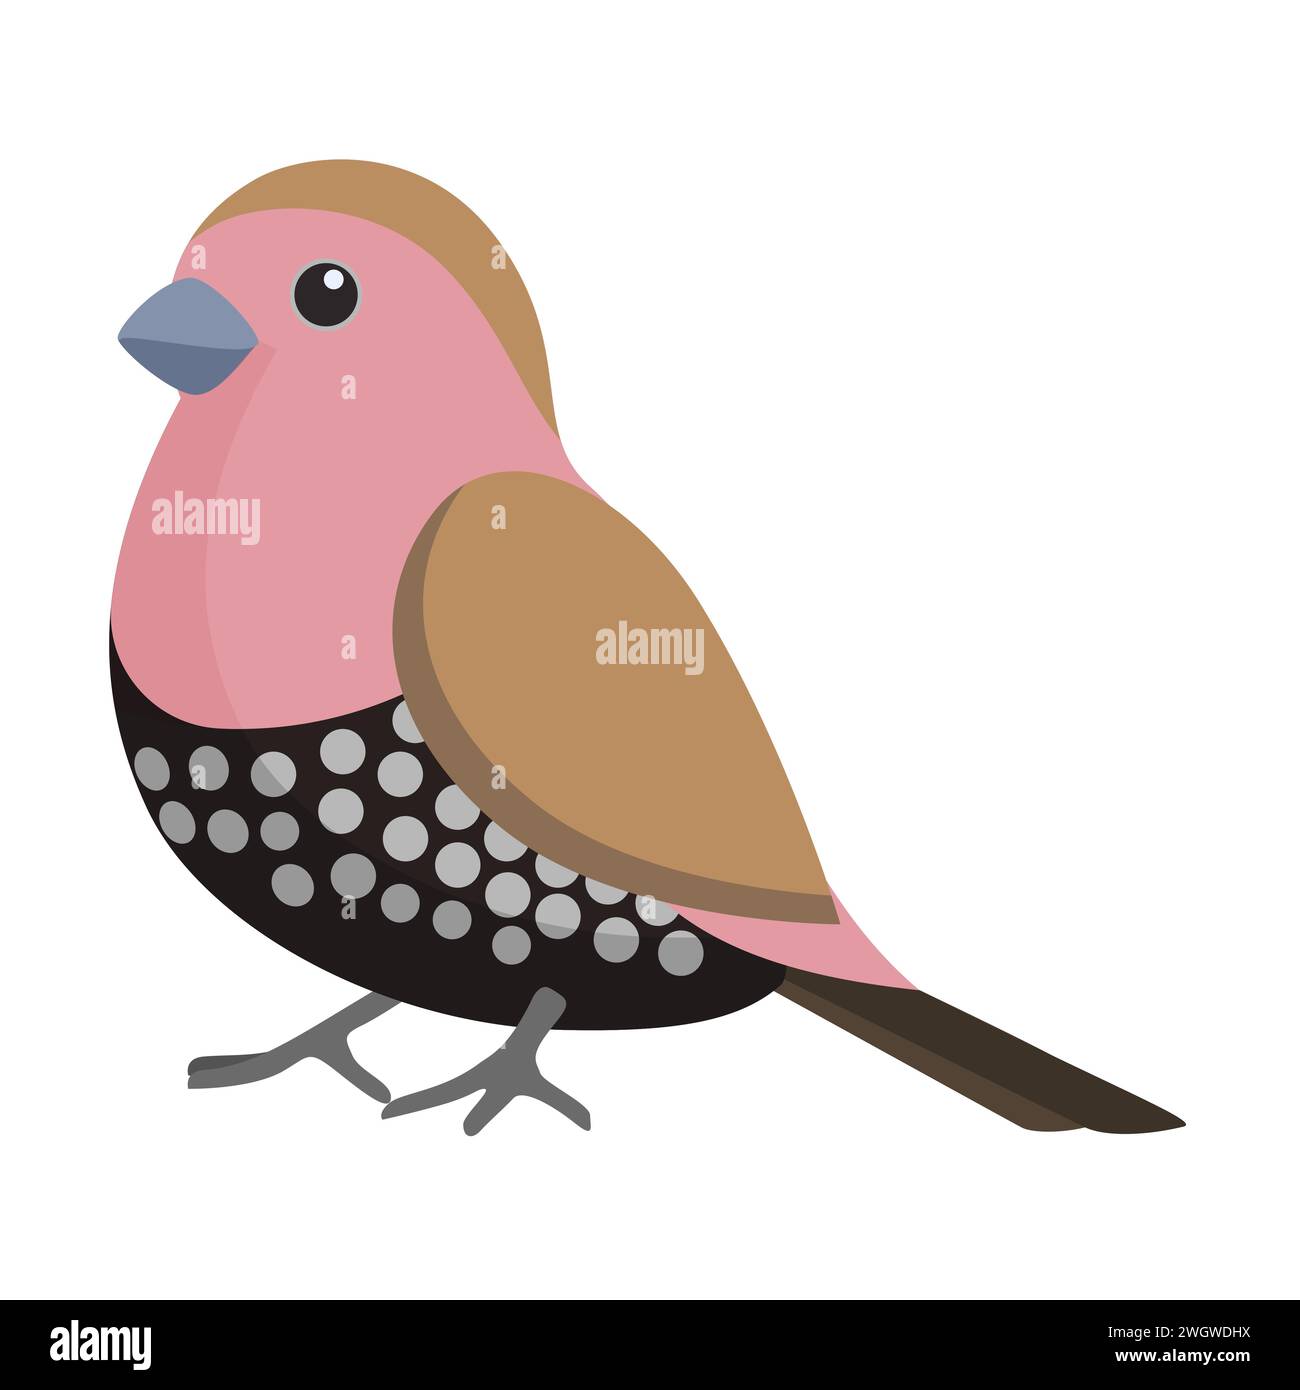 Little bird with pink and black feathers, wings and tail vector illustration Stock Vector